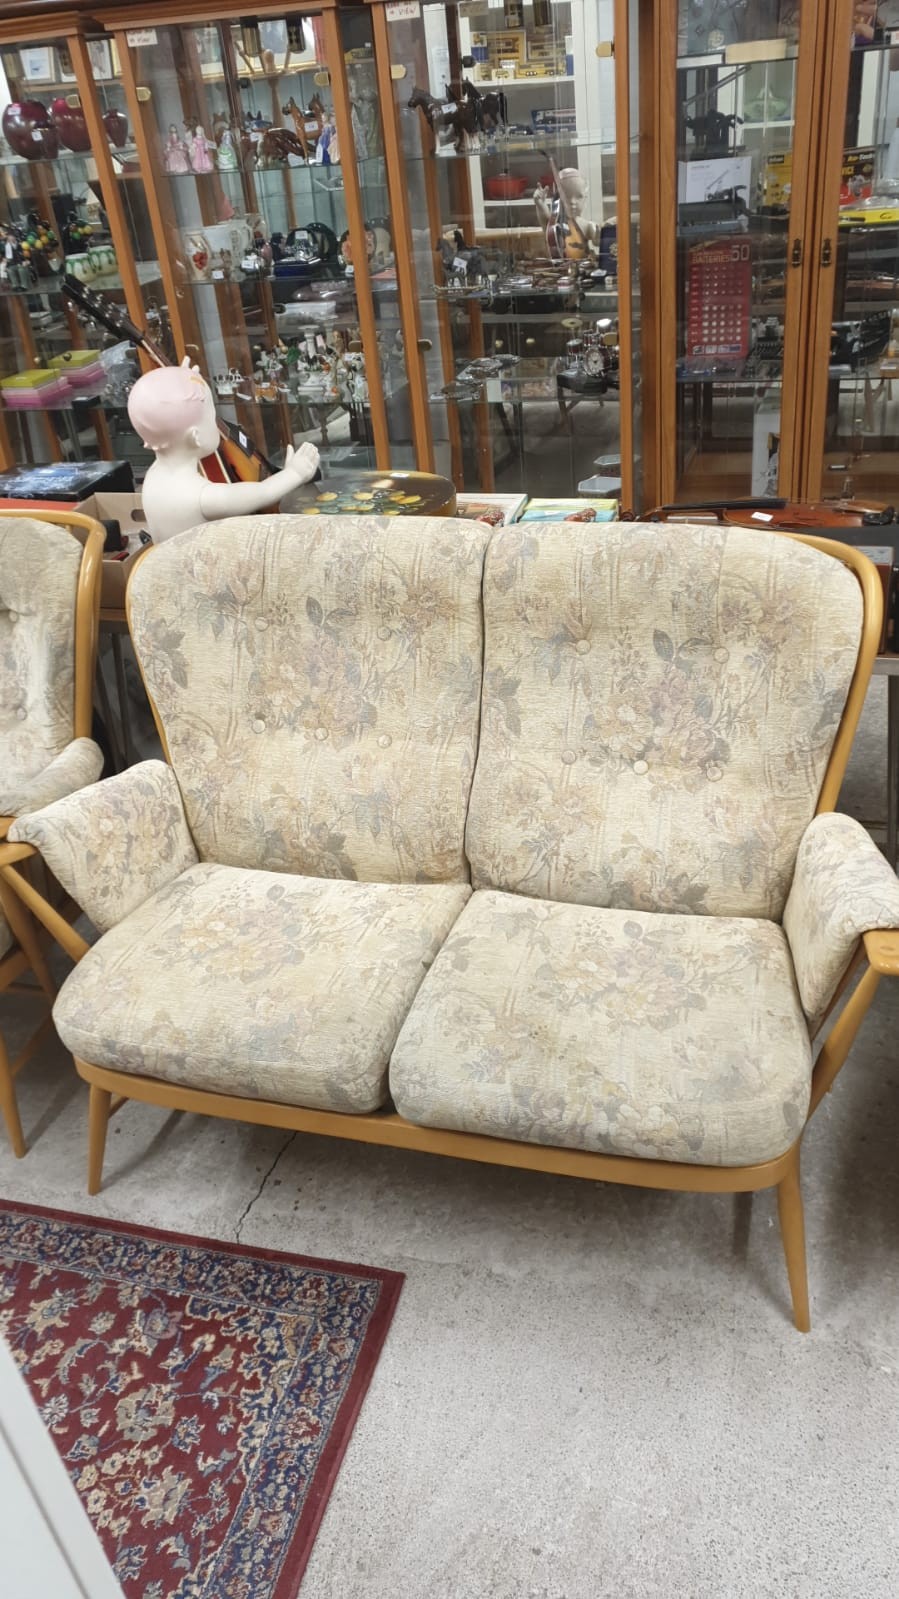 Ercol Blonde wood 3 piece suite with original cushions. - Image 4 of 6